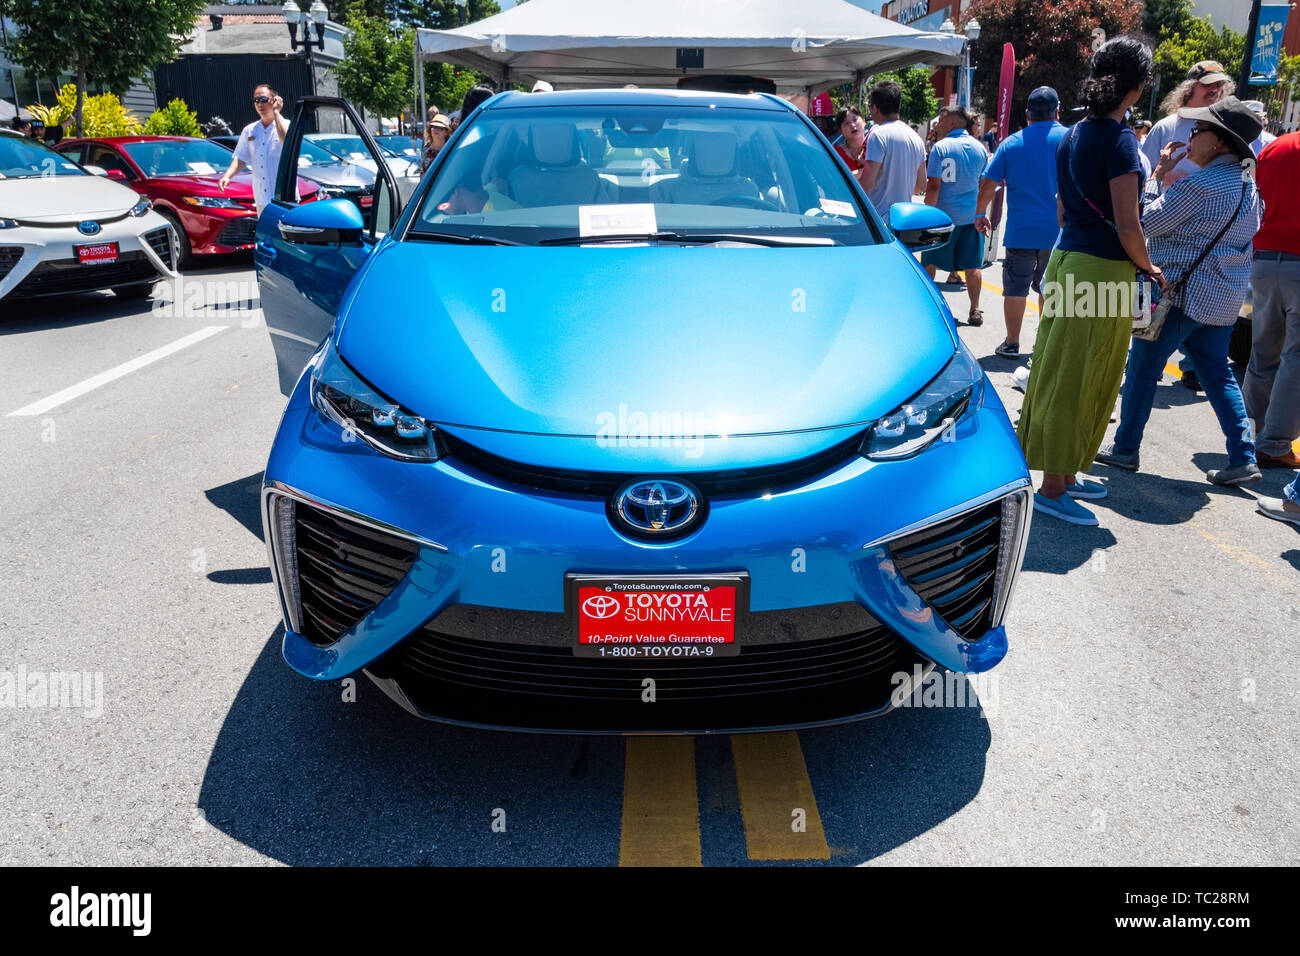 June 2, 2019 Sunnyvale / CA / USA - The Toyota Mirai fuelcell car (a mid-size hydrogen fuel cell car manufactured by Toyota) on display in downtown Su Stock Photo